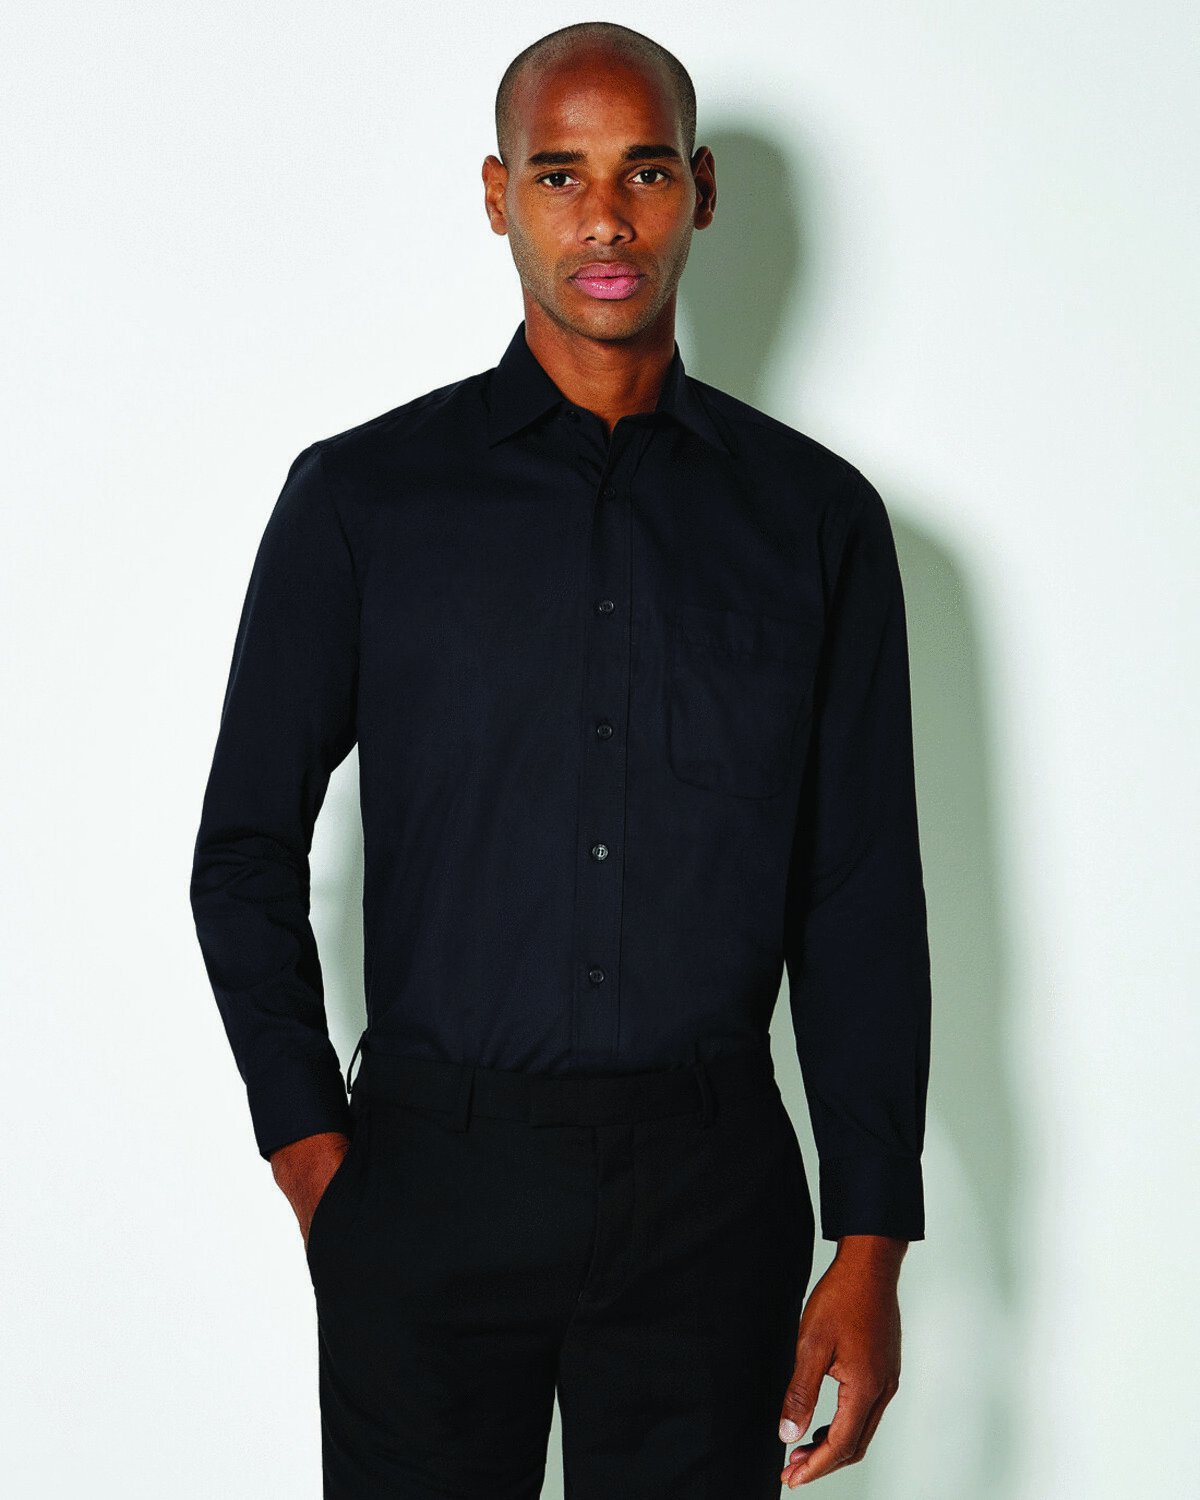 CLASSIC FIT LONG SLEEVE BUSINESS SHIRT